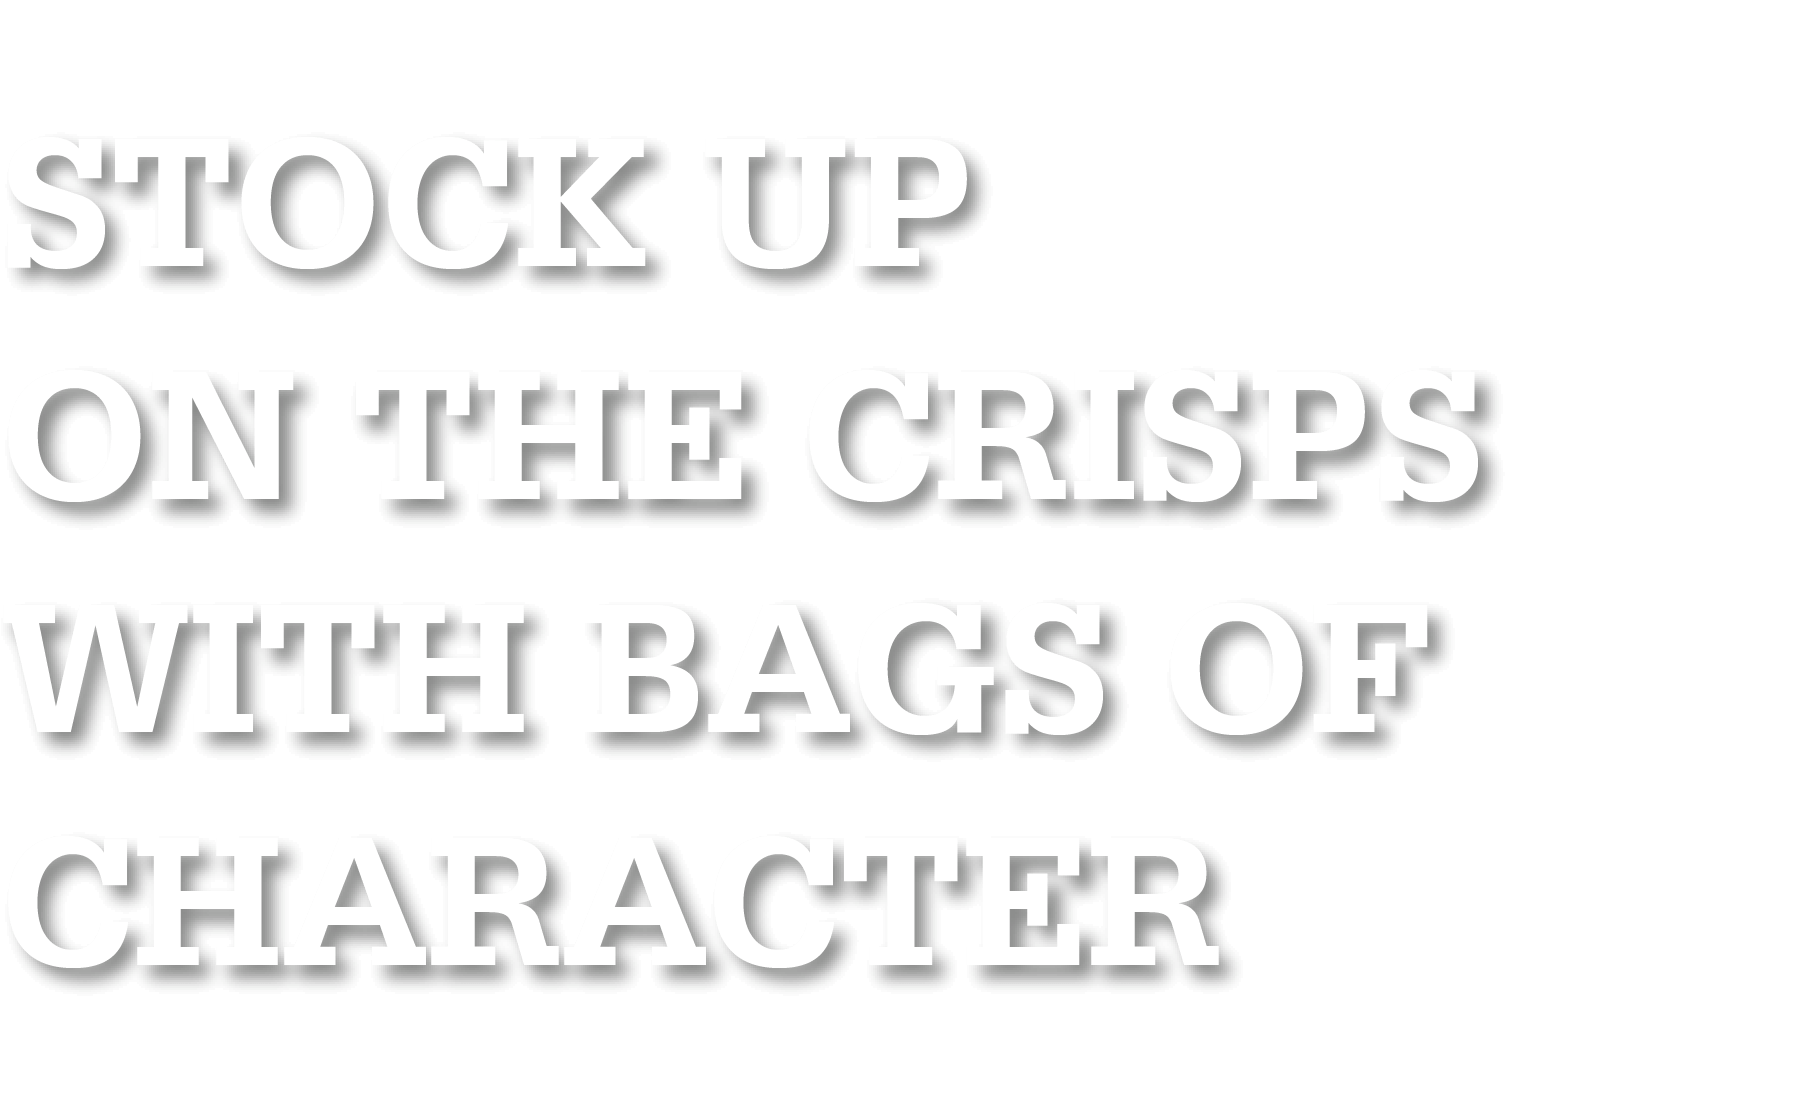 STOCK UP ON THE CRISPS WITH BAGS OF CHARACTER